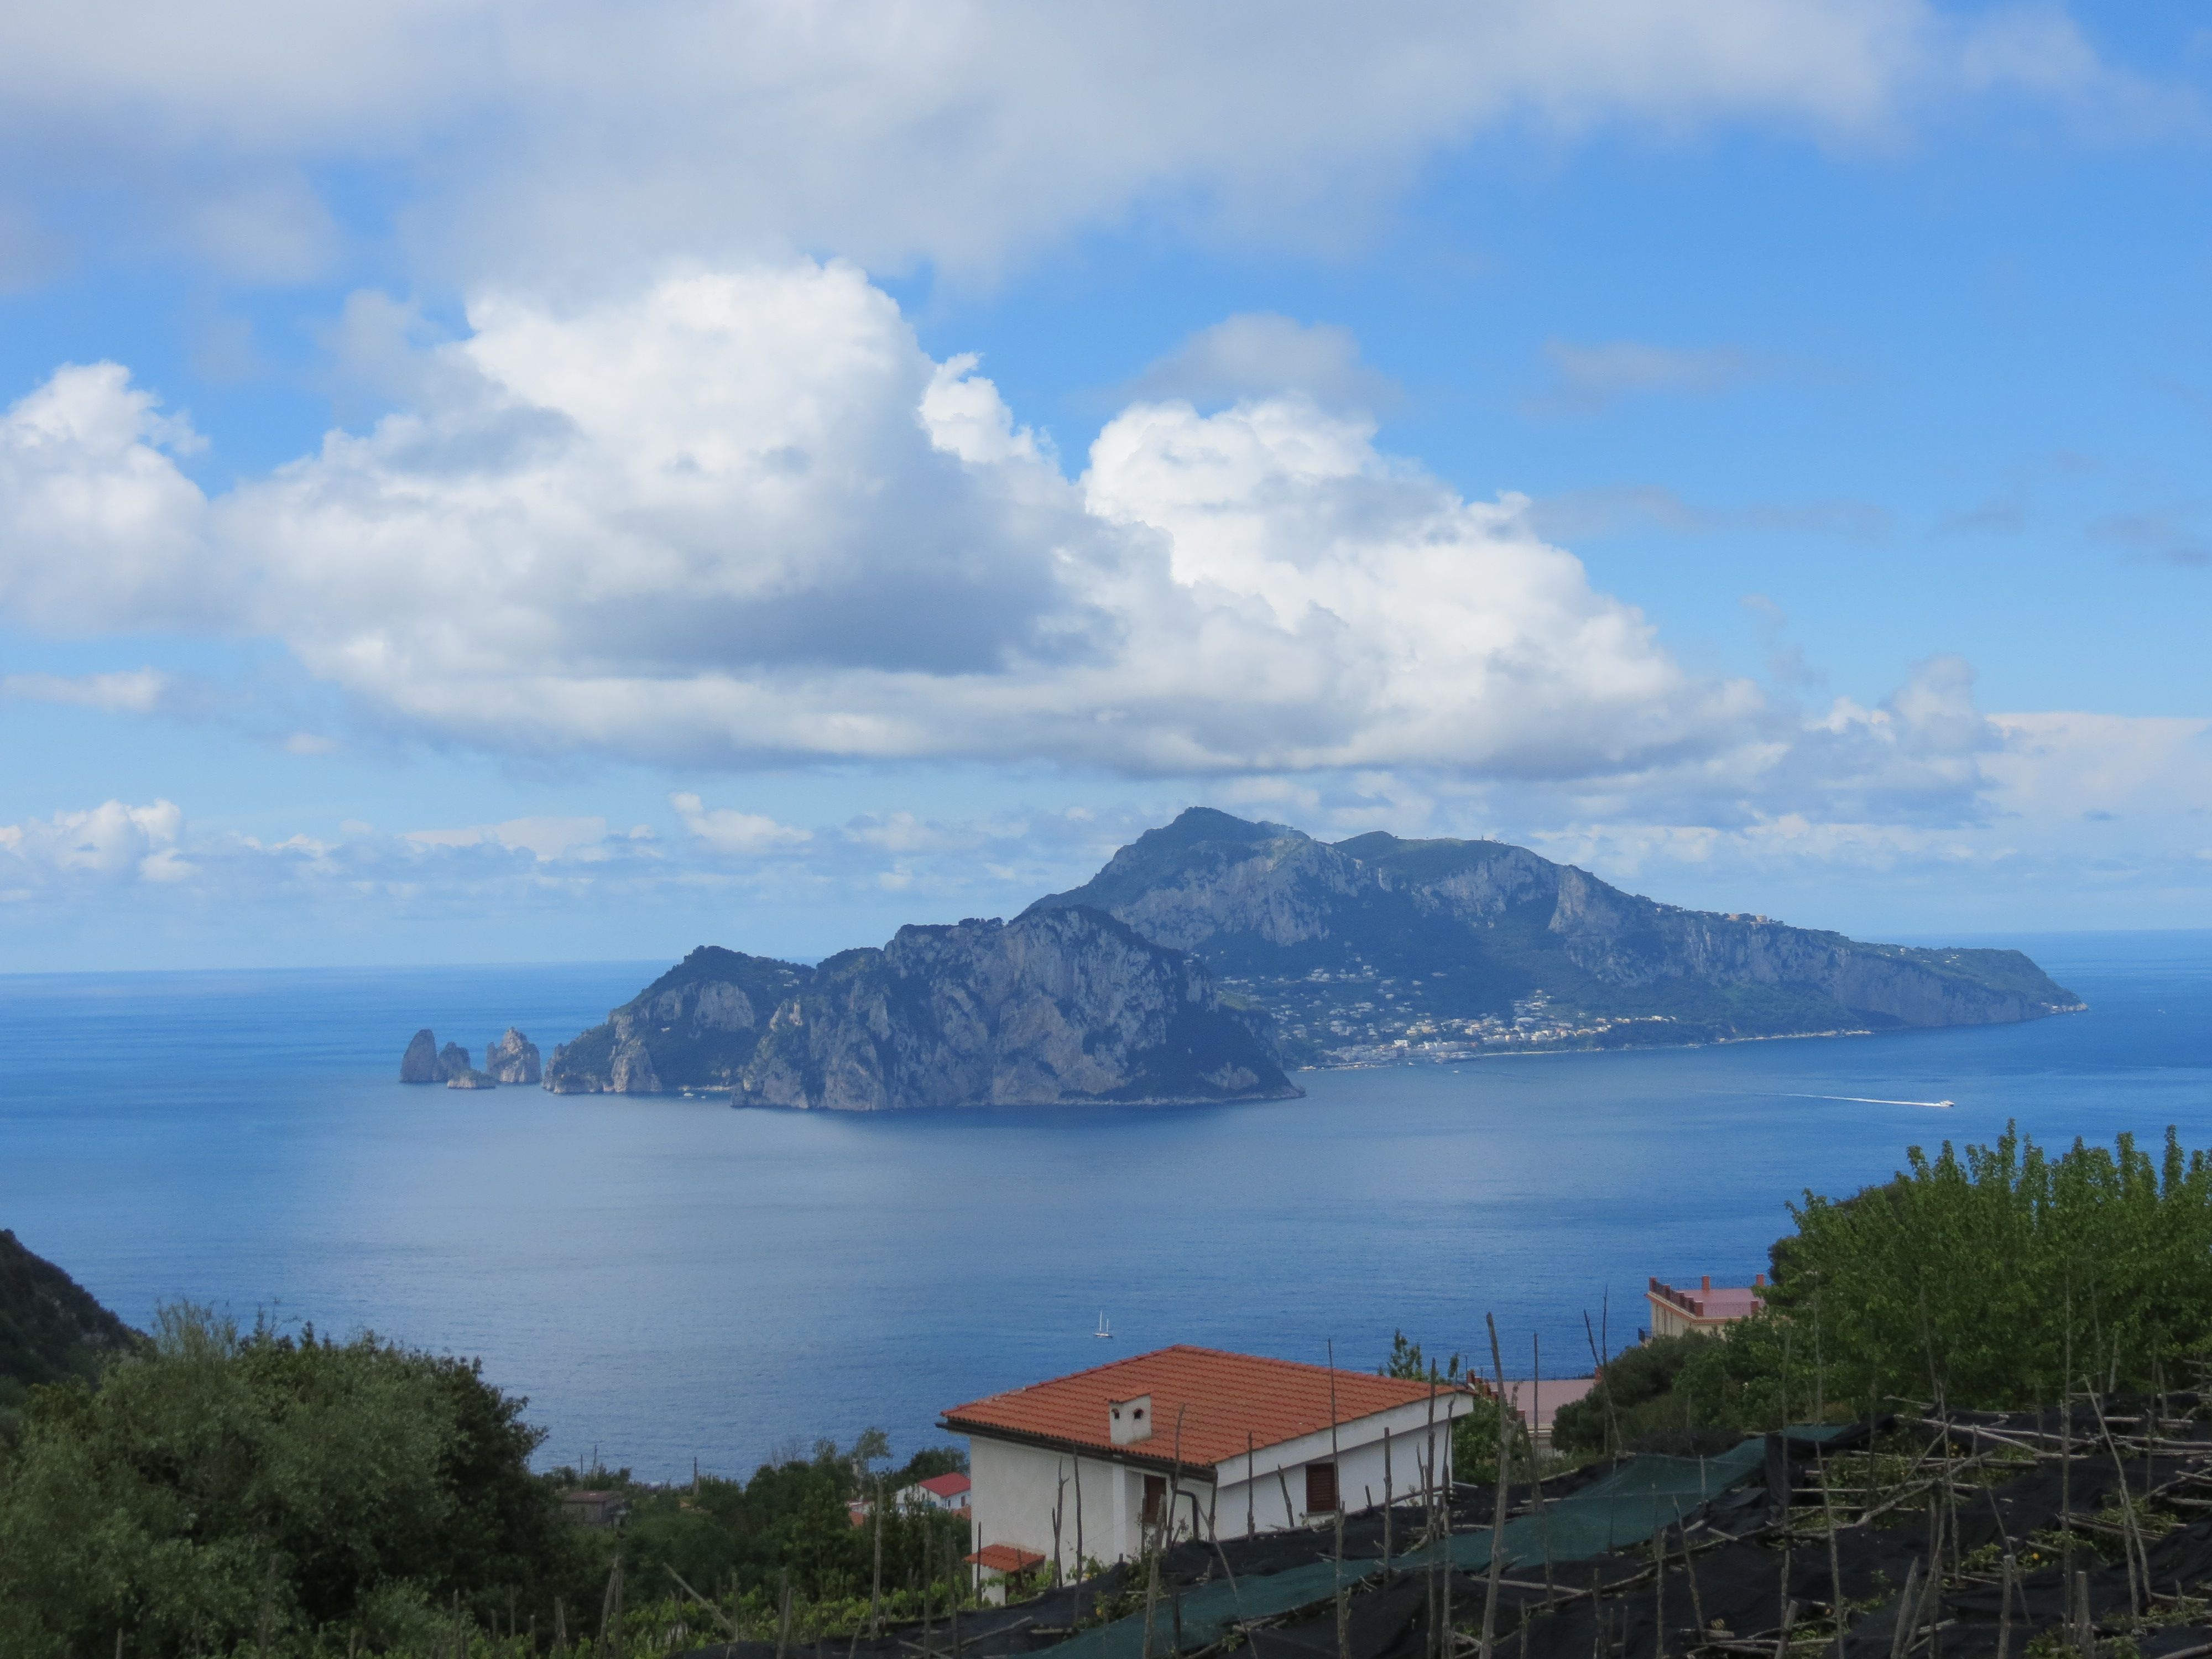 Capri from a distance